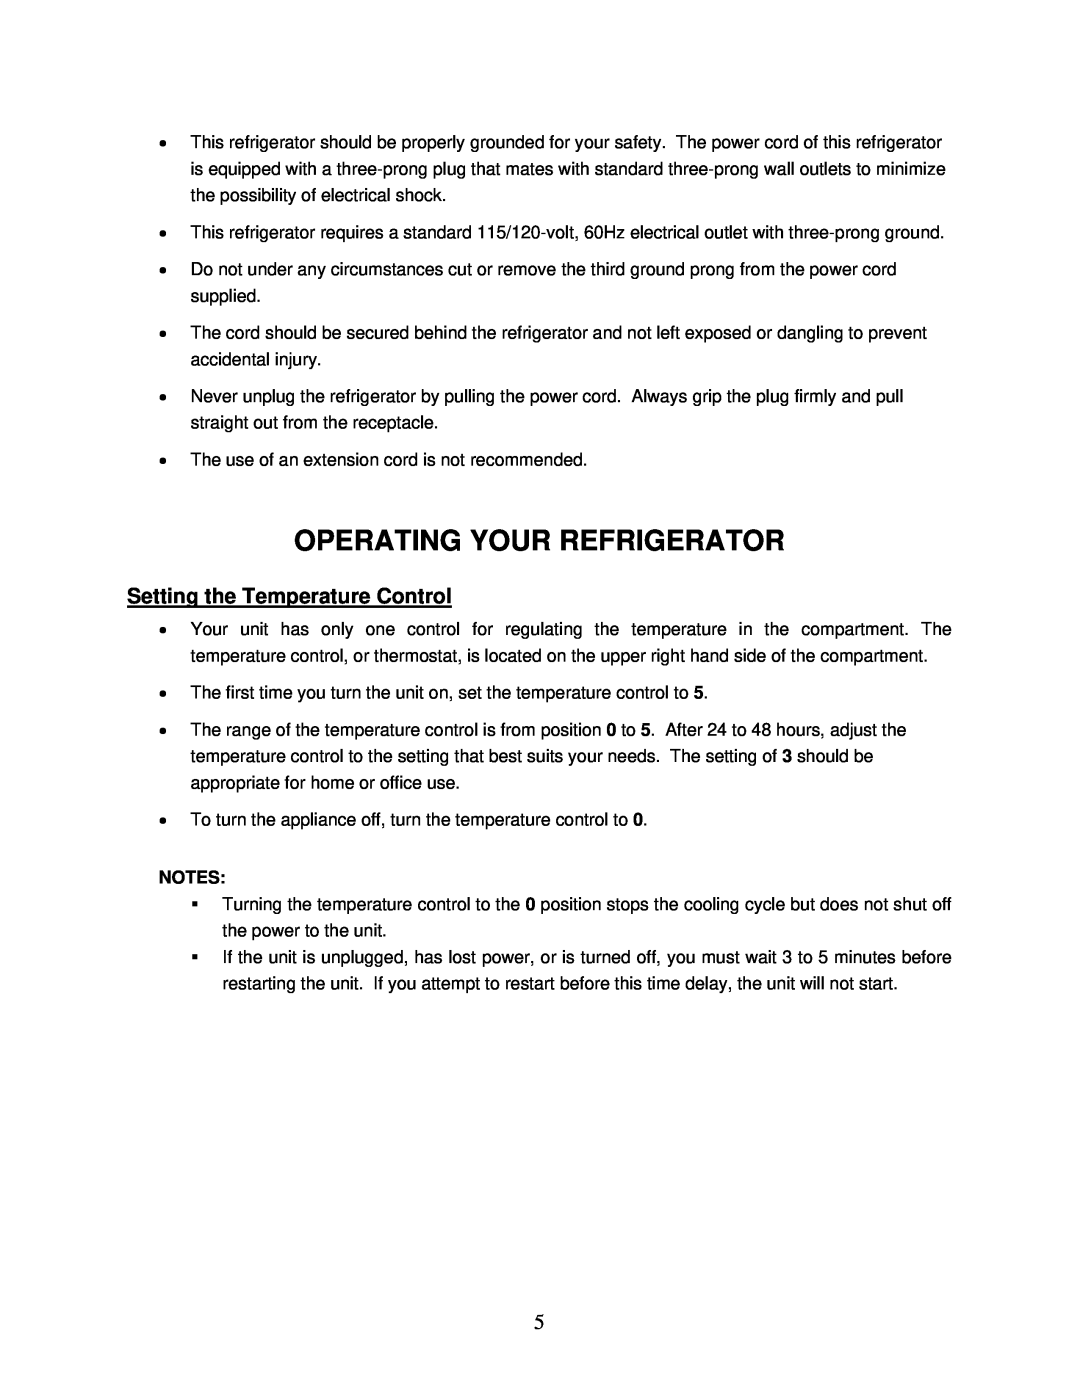 Summit FF28L instruction manual Operating Your Refrigerator, Setting the Temperature Control 